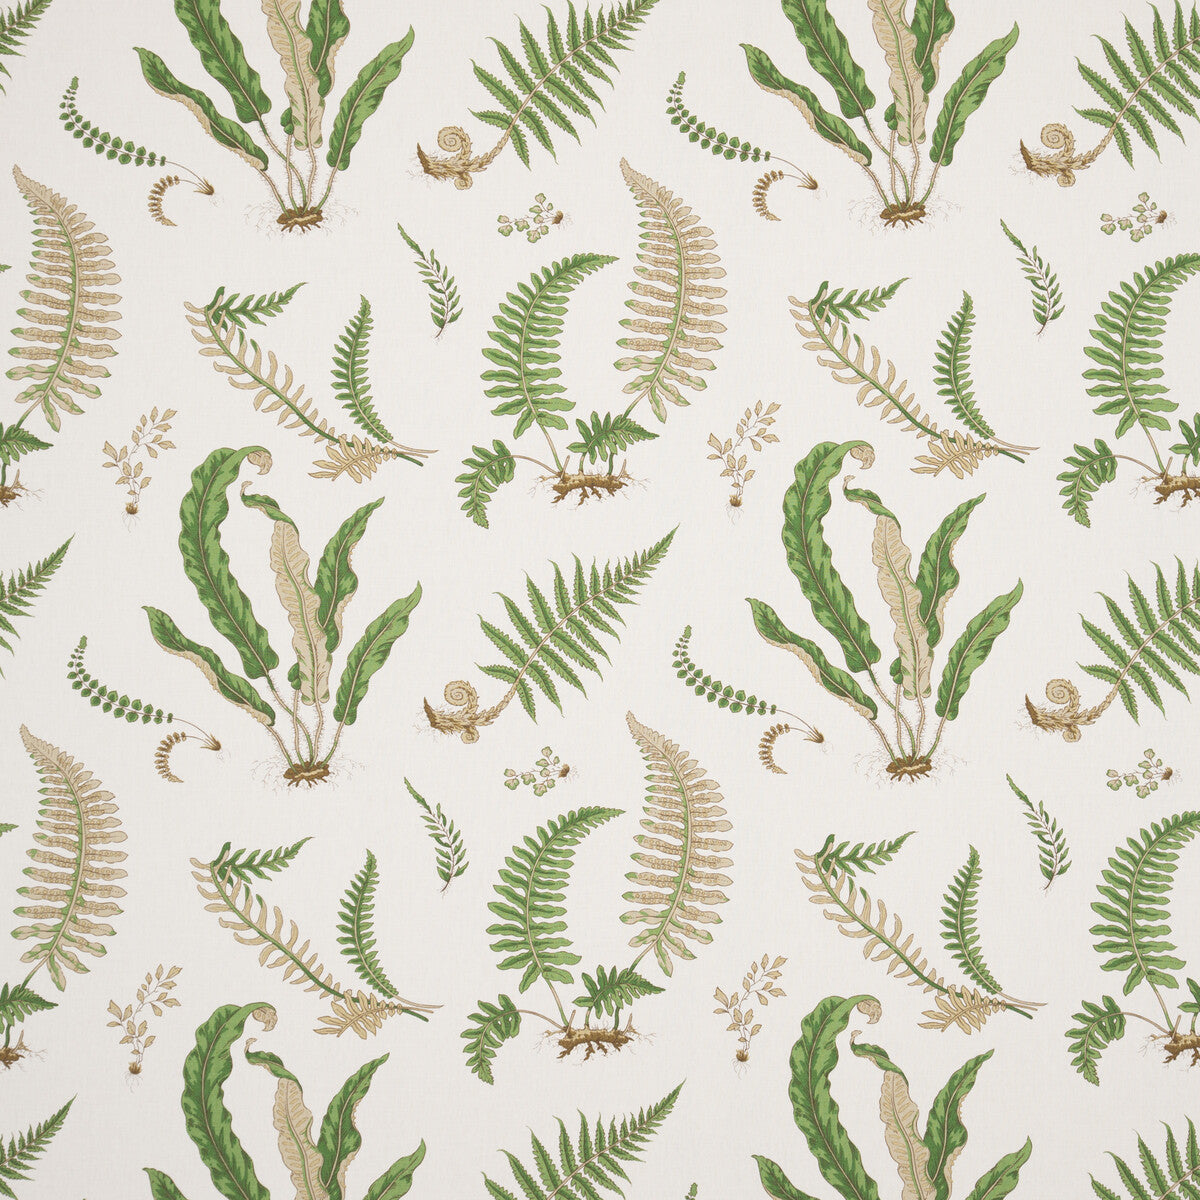 Ferns Linen fabric in stone/green color - pattern R1324.1.0 - by G P &amp; J Baker in the Perennia collection